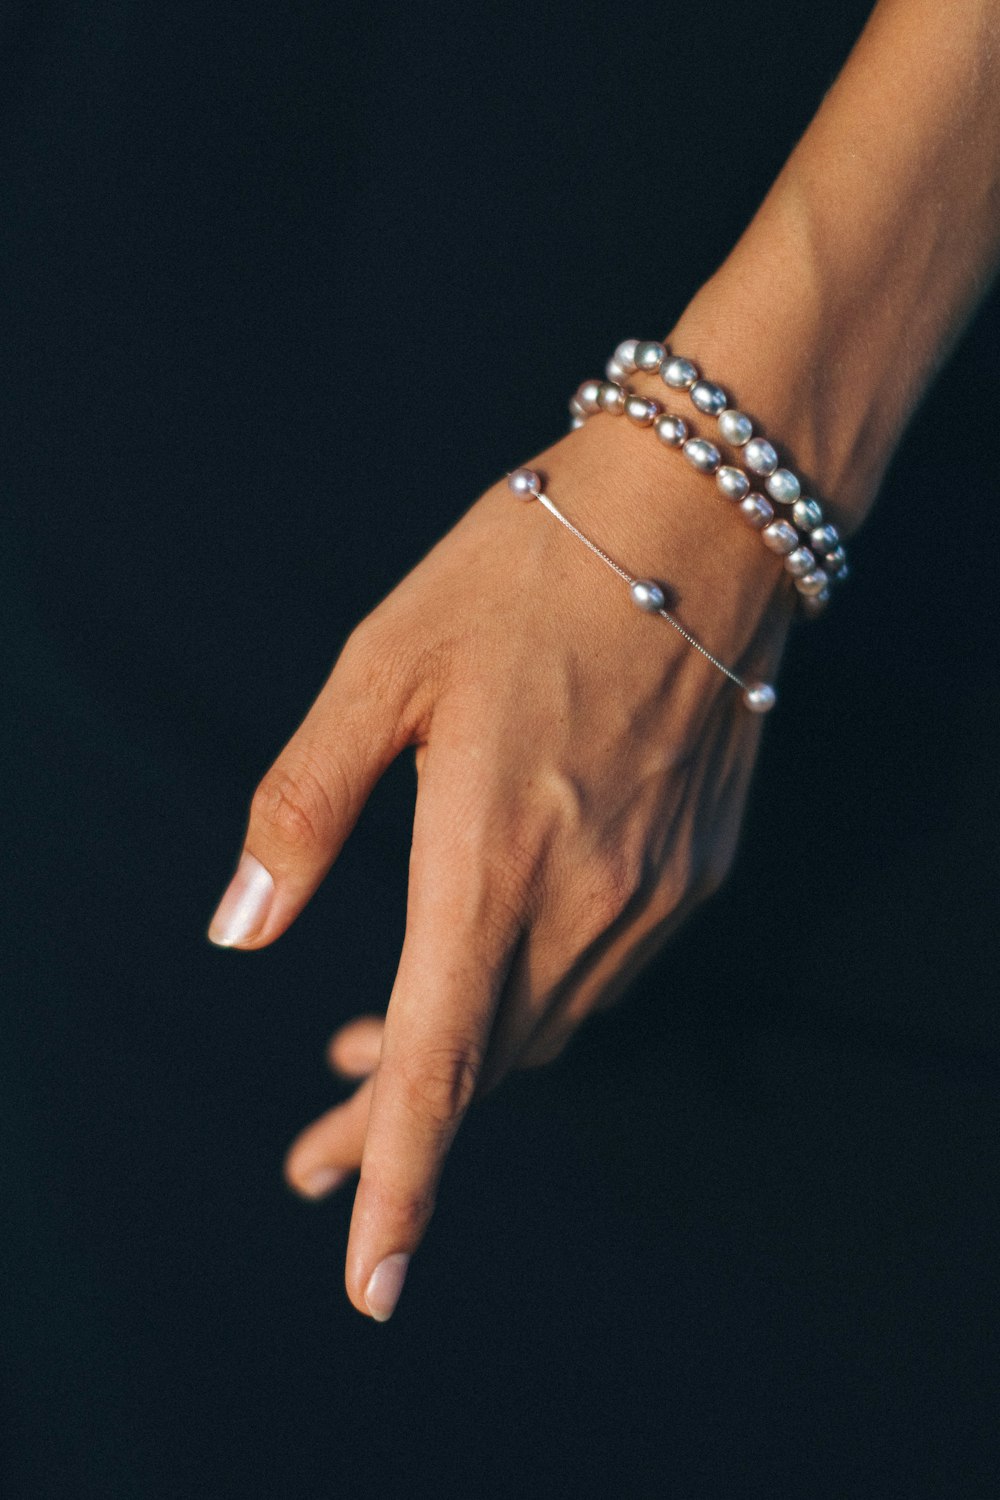 person wearing silver bracelet and gold ring